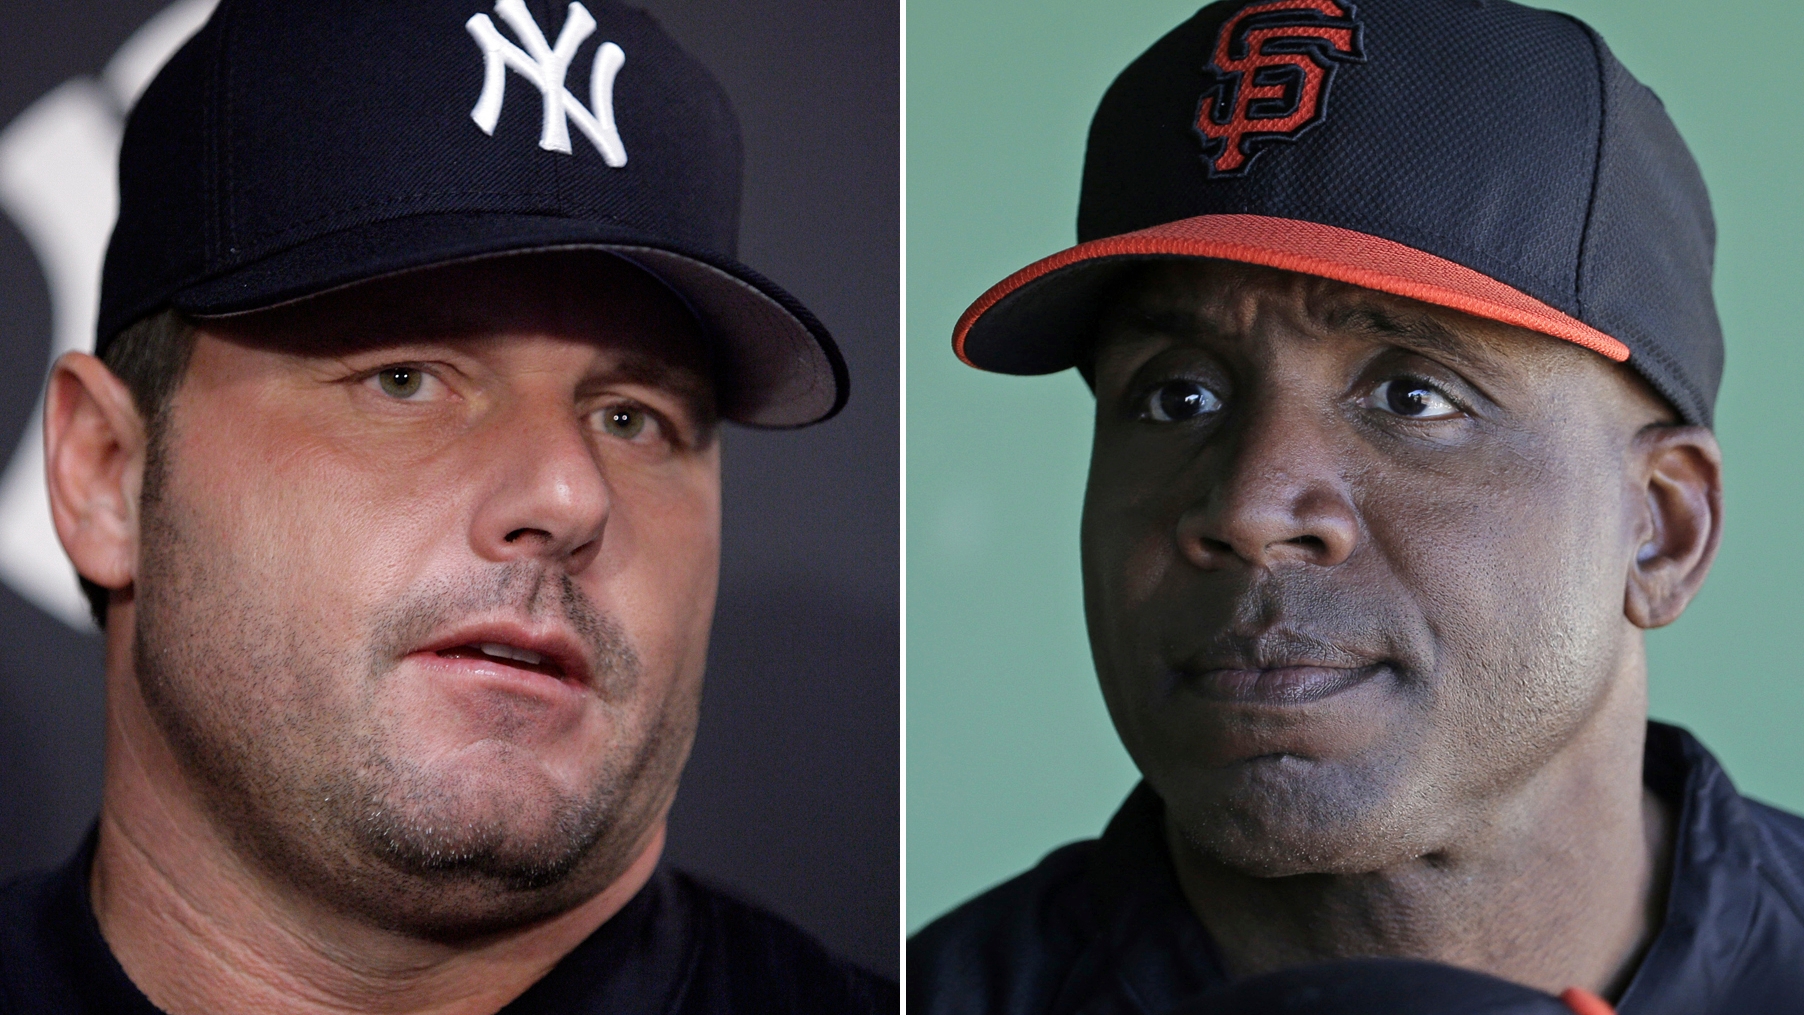 David Ortiz, Barry Bonds, Sammy Sosa and Roger Clemens - Who Has the Higher Net  Worth in 2022? - EssentiallySports